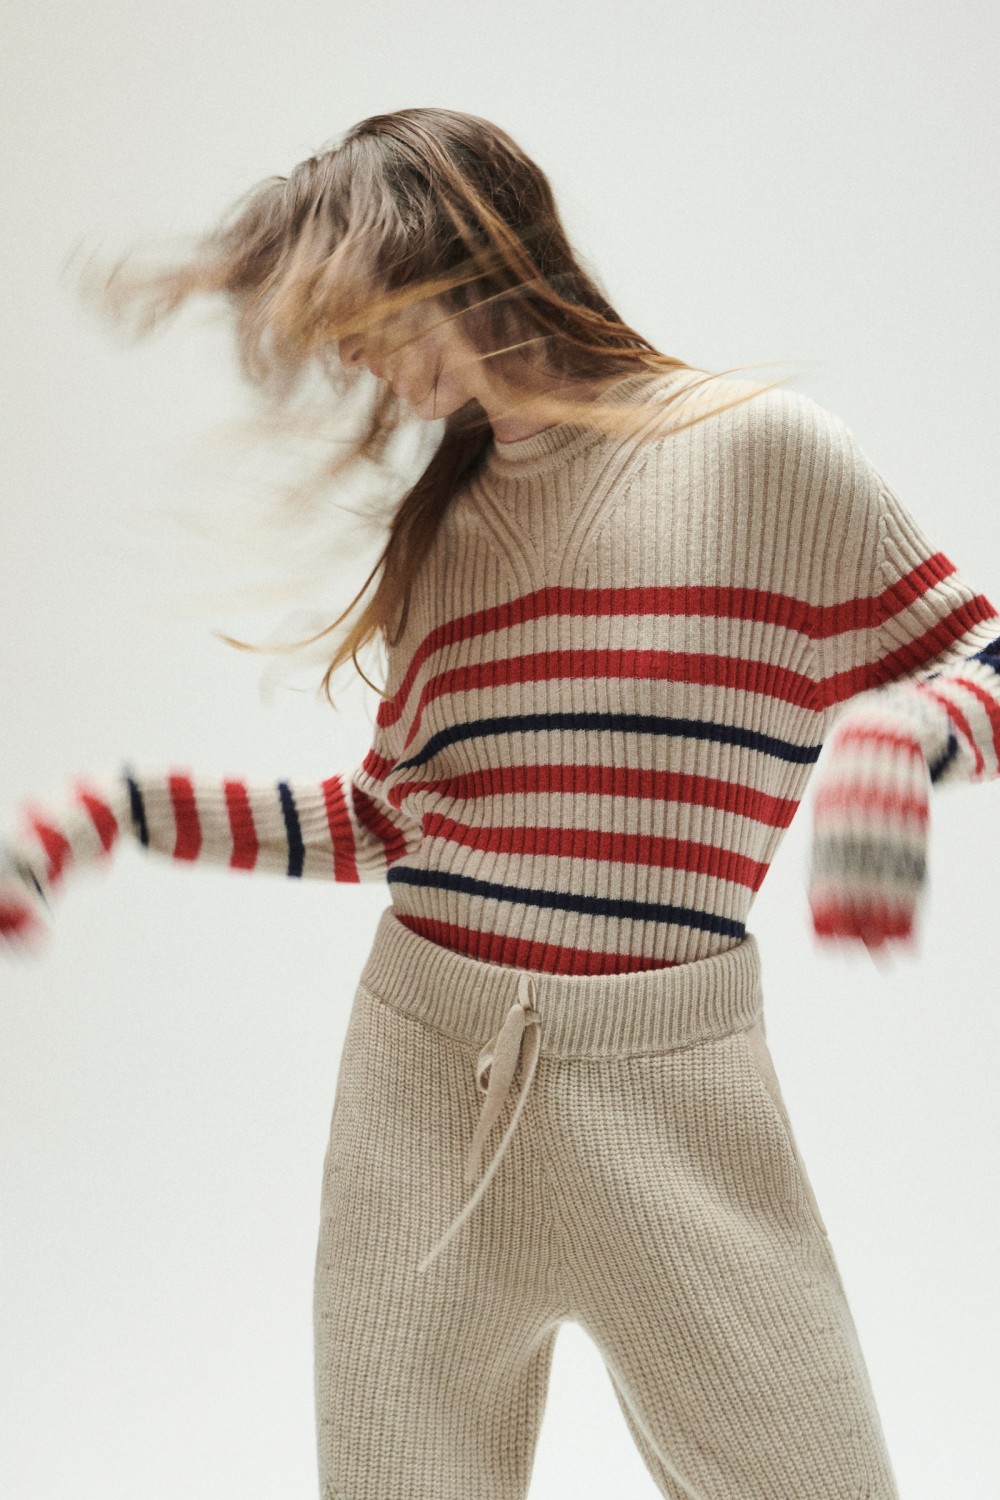 Paradis Perdus Launches With 100 Recycled Cashmere SweatersAnd a New Vision of Sustainability